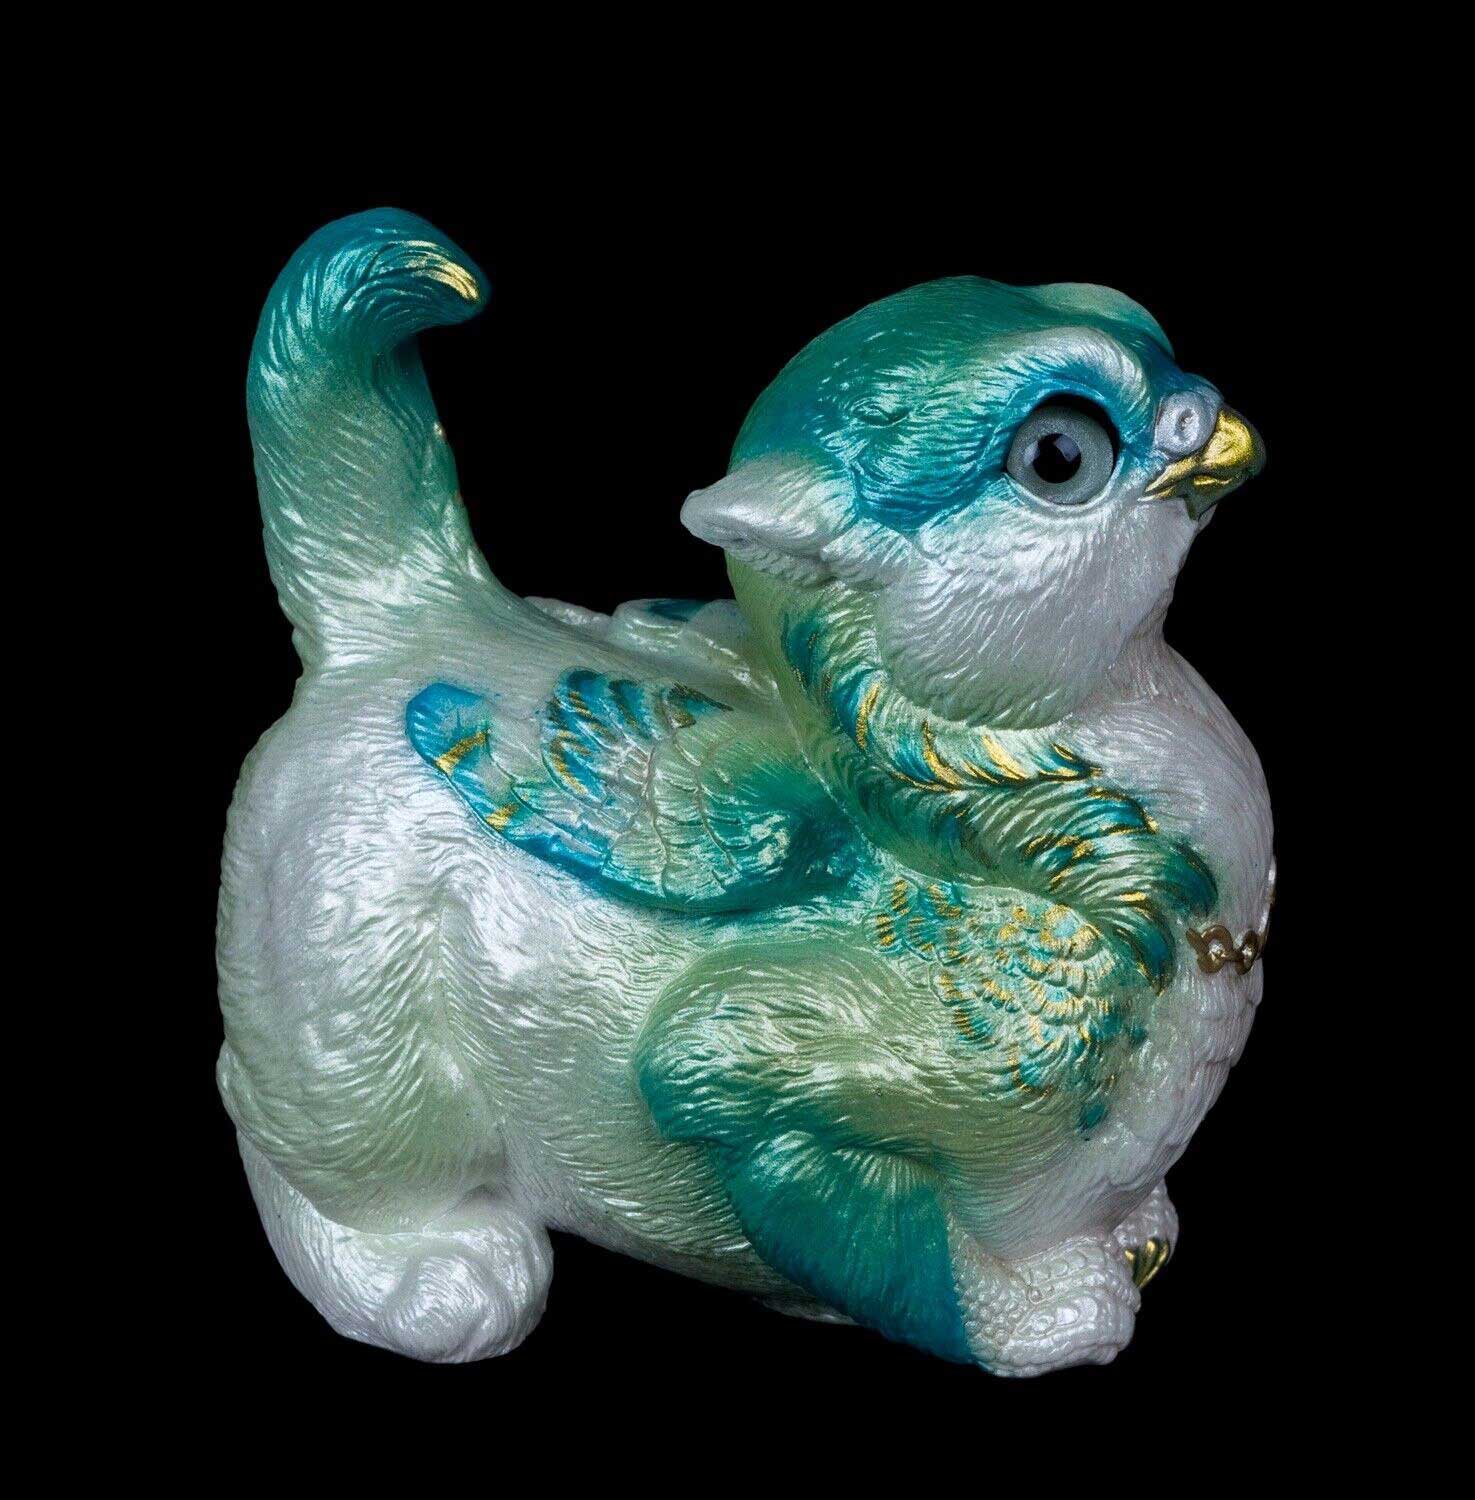 20230304-Seaglass-Crouching-Griffin-Chick-Test-Paint-1-by-Gina